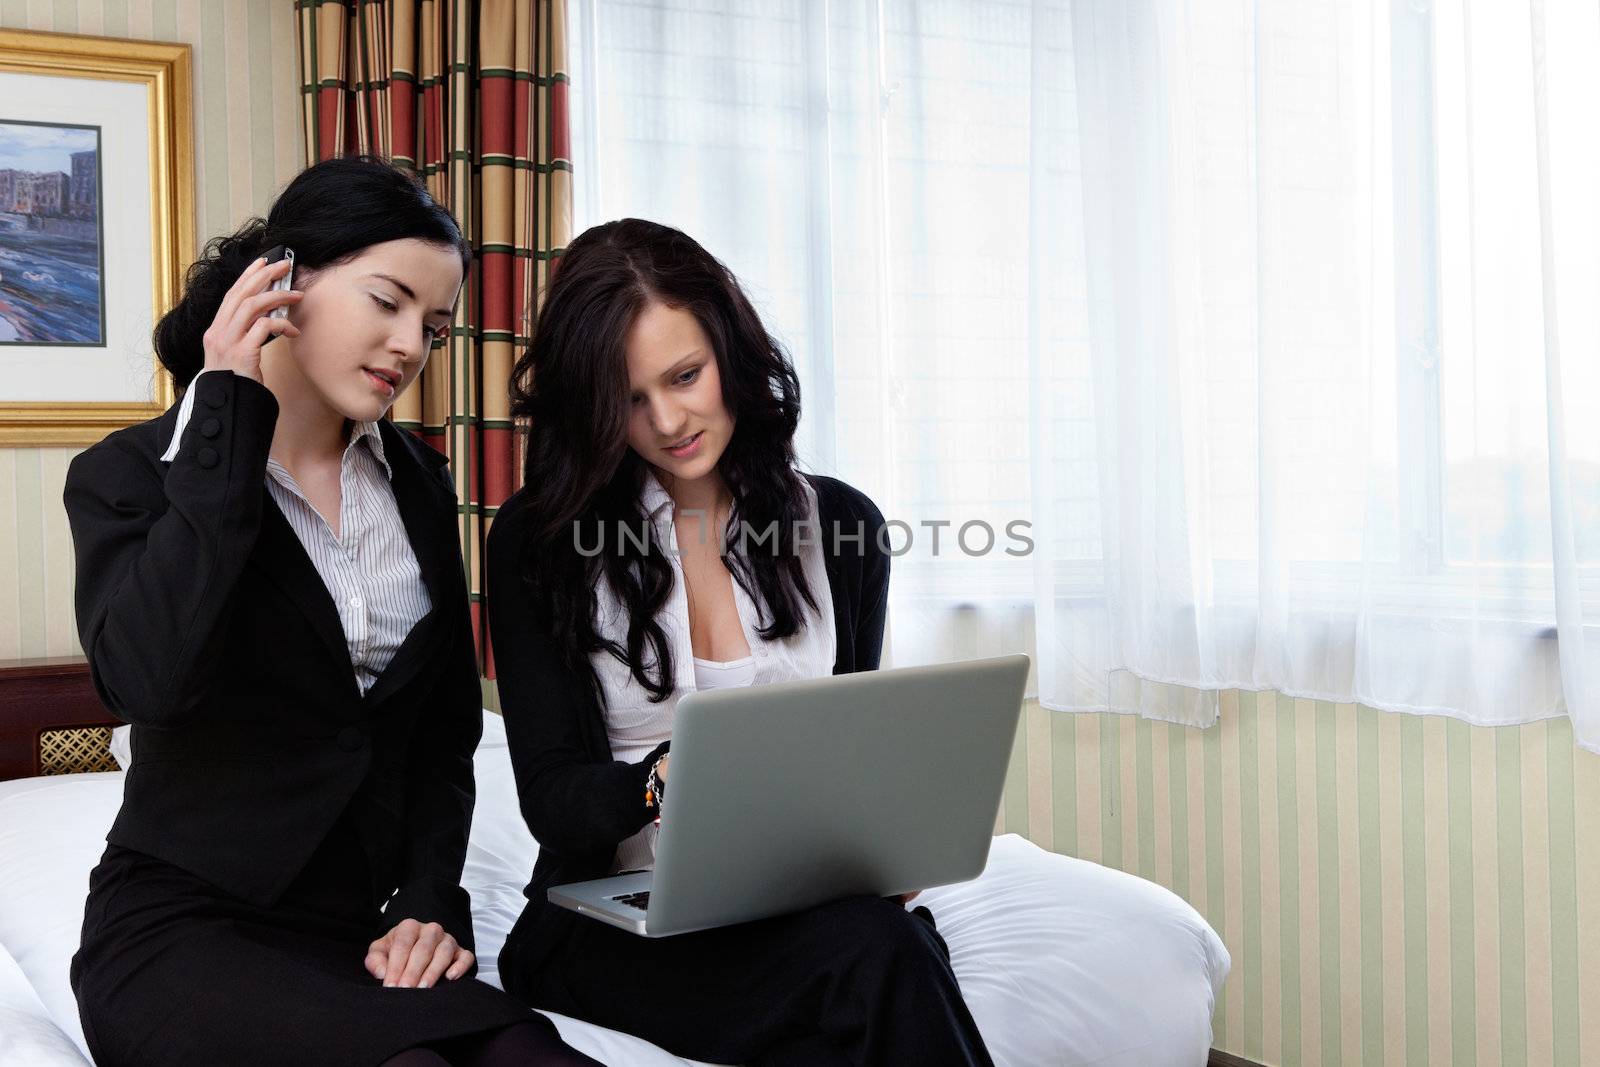 Female executive working on laptop while her colleague talks on cell phone